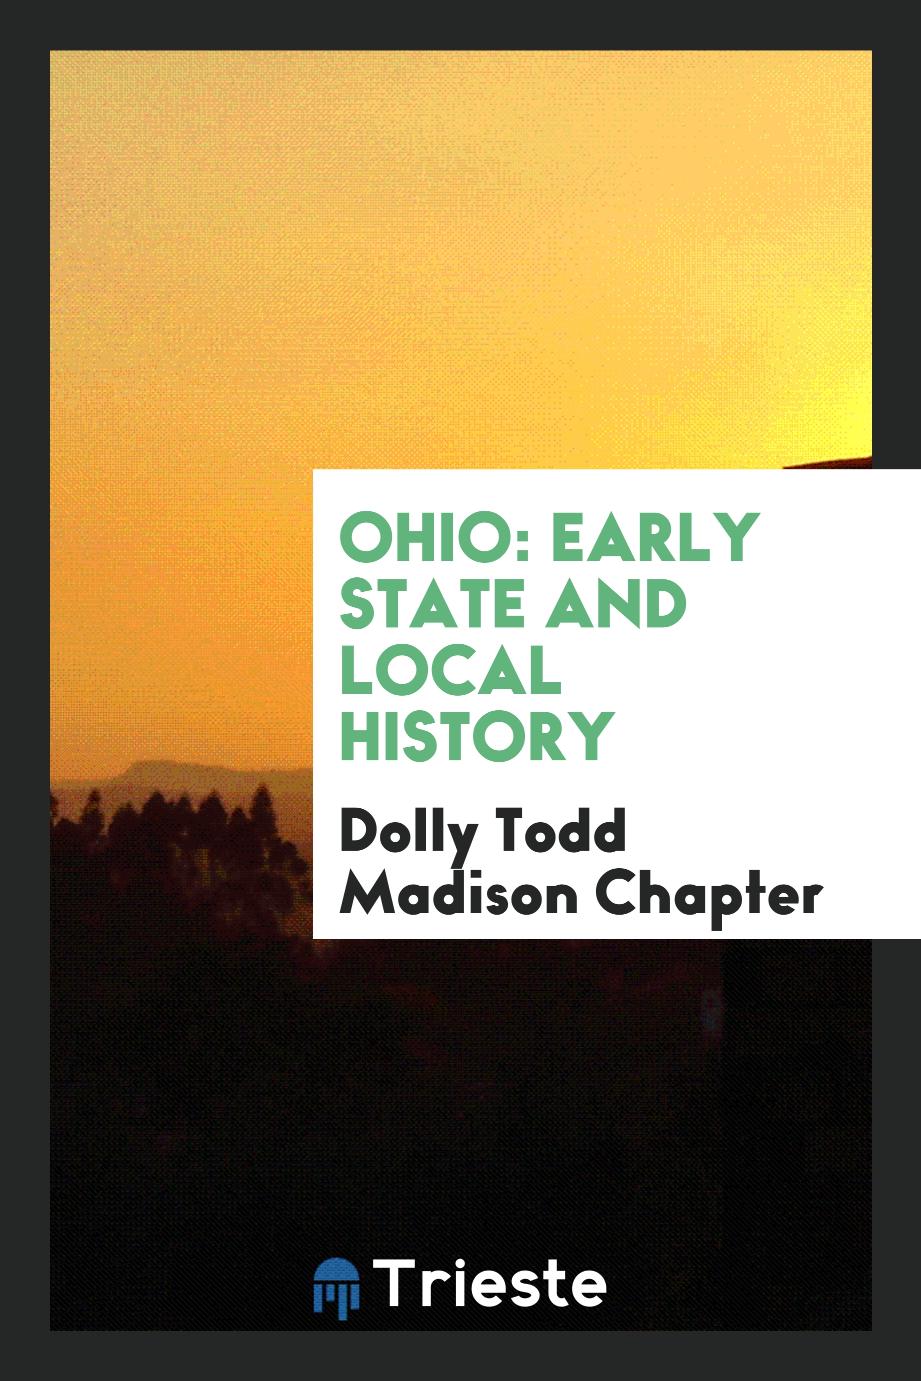 Ohio: Early State and Local History